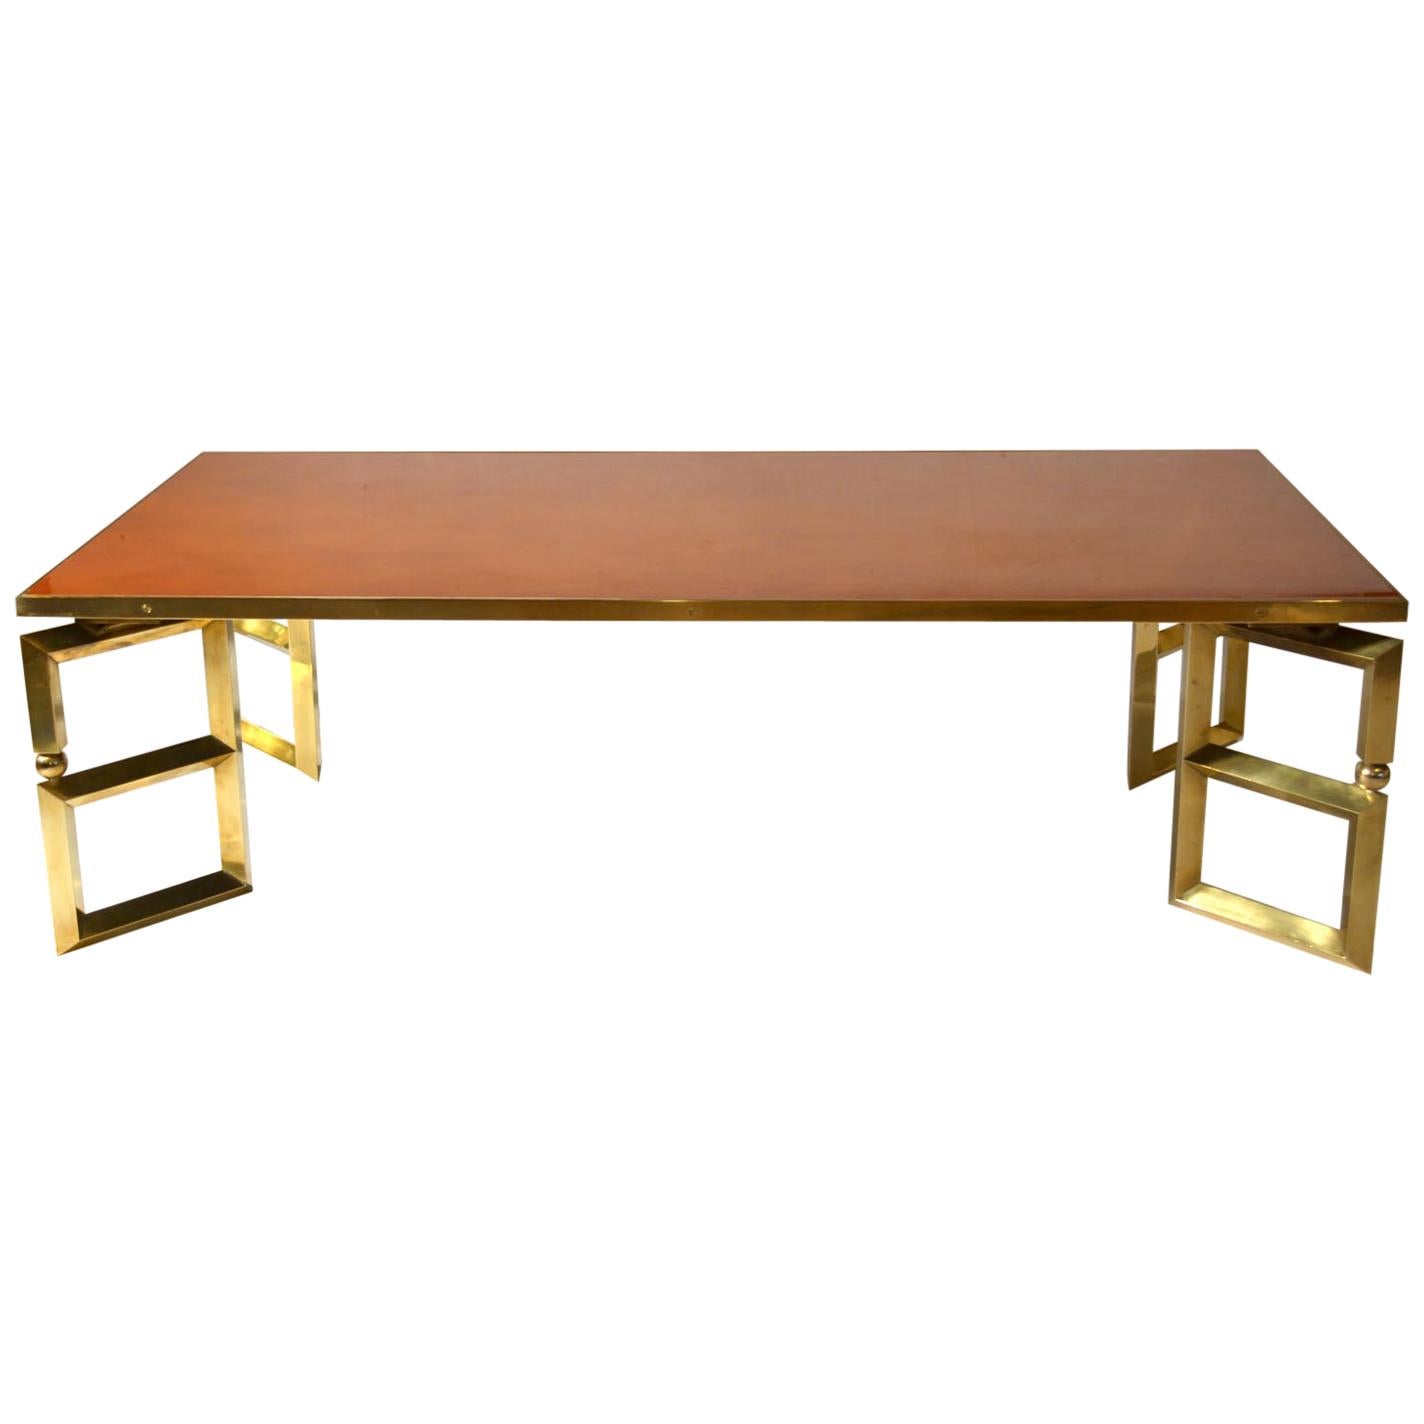 Sophisticated rectangular 1970s coffee table attributed to Guy Lefevre, signed Maison Jansen, Paris. The brass edged table has a burned orange lacquered wooden top inserted. Four brass legs are placed in a cross pointing outwards to the corners to